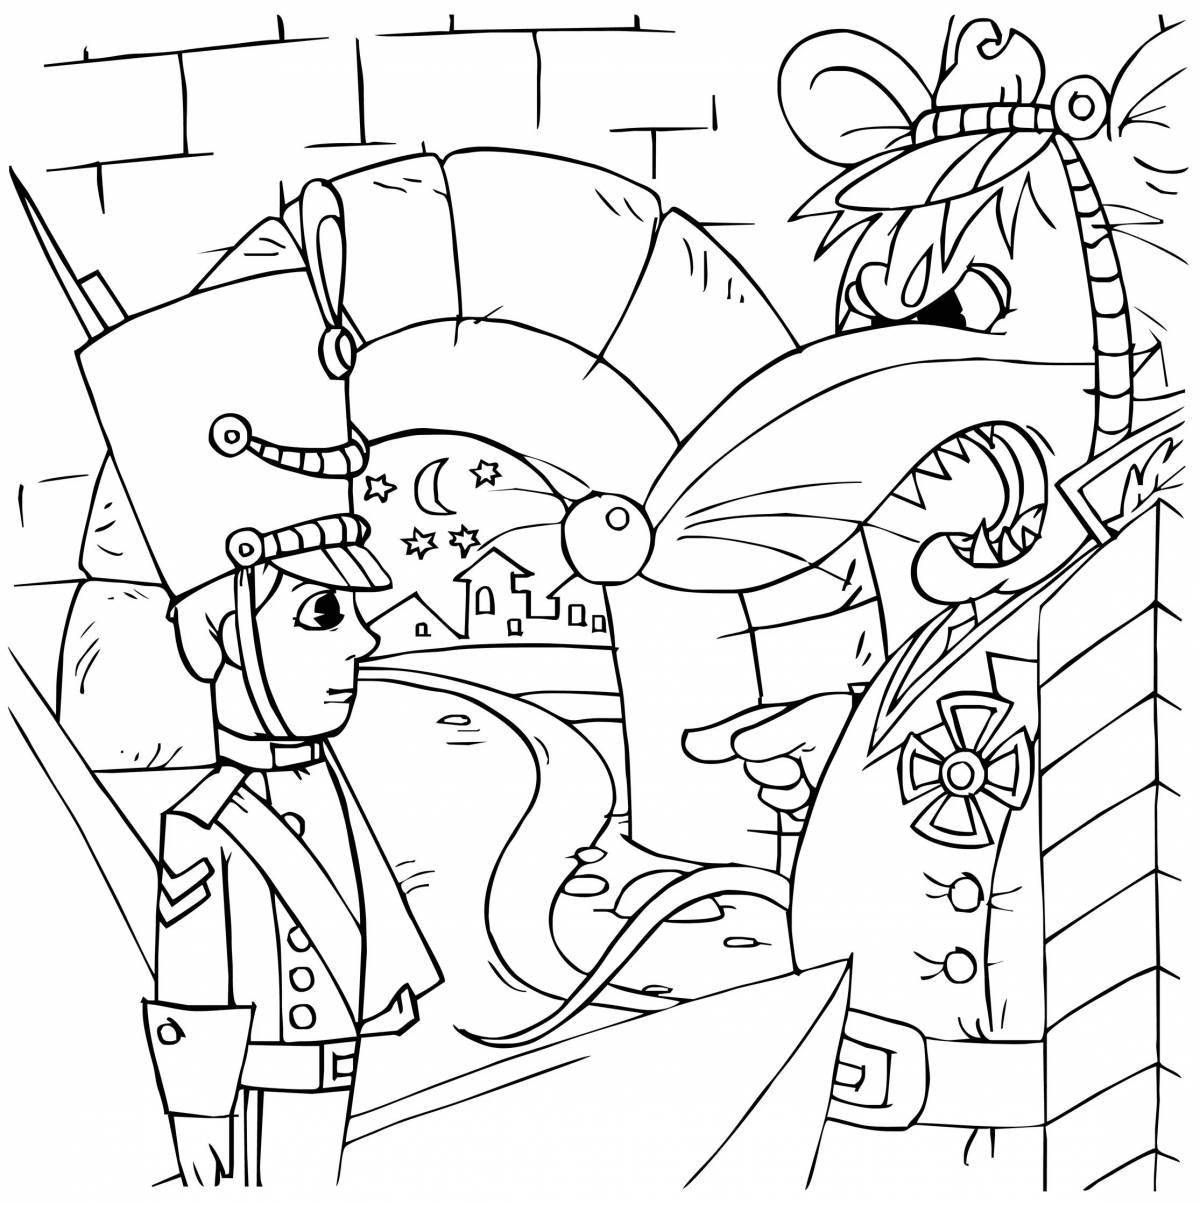 Coloring page of the seductive tenacious tin soldier